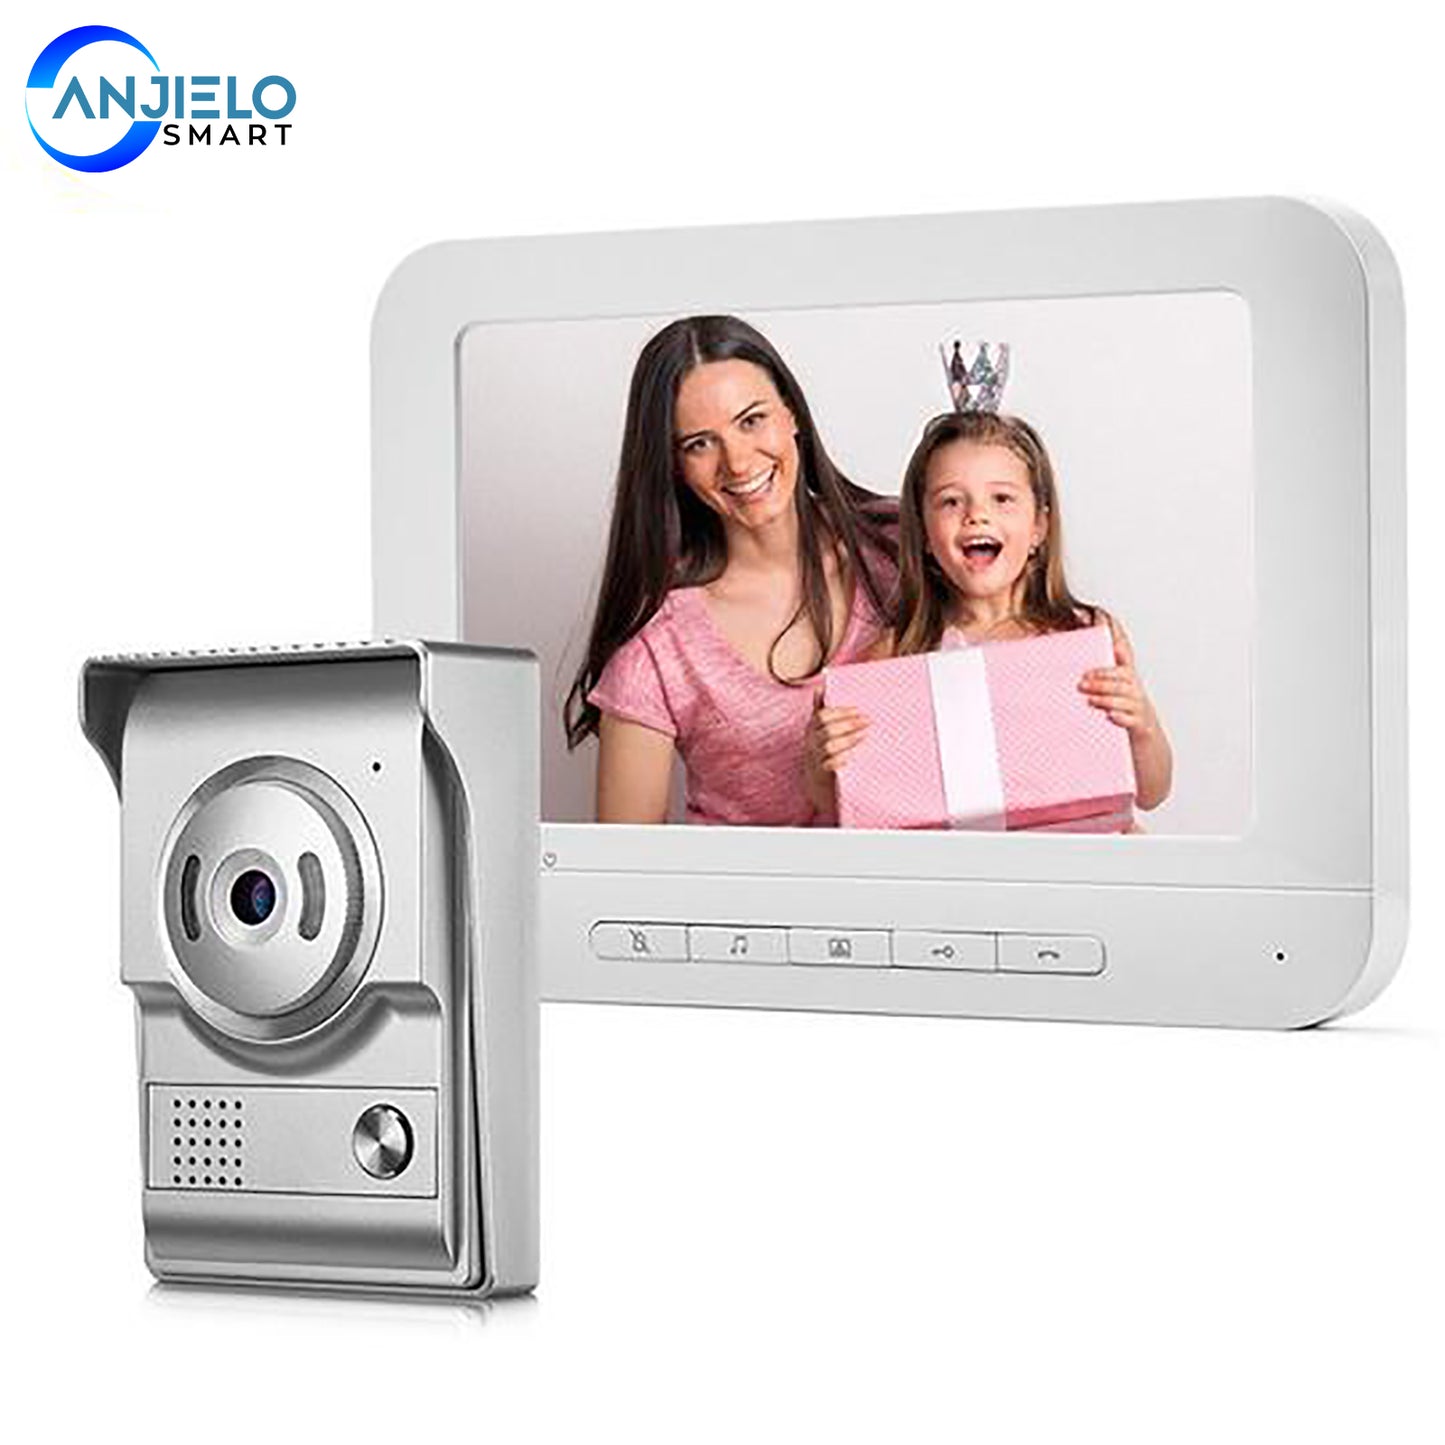 AnjieloSmart 7 inch Monitor Doorbell Dual-Way Intercom Wired Video Door Phone for Home Security System Support Electric Lock Connect